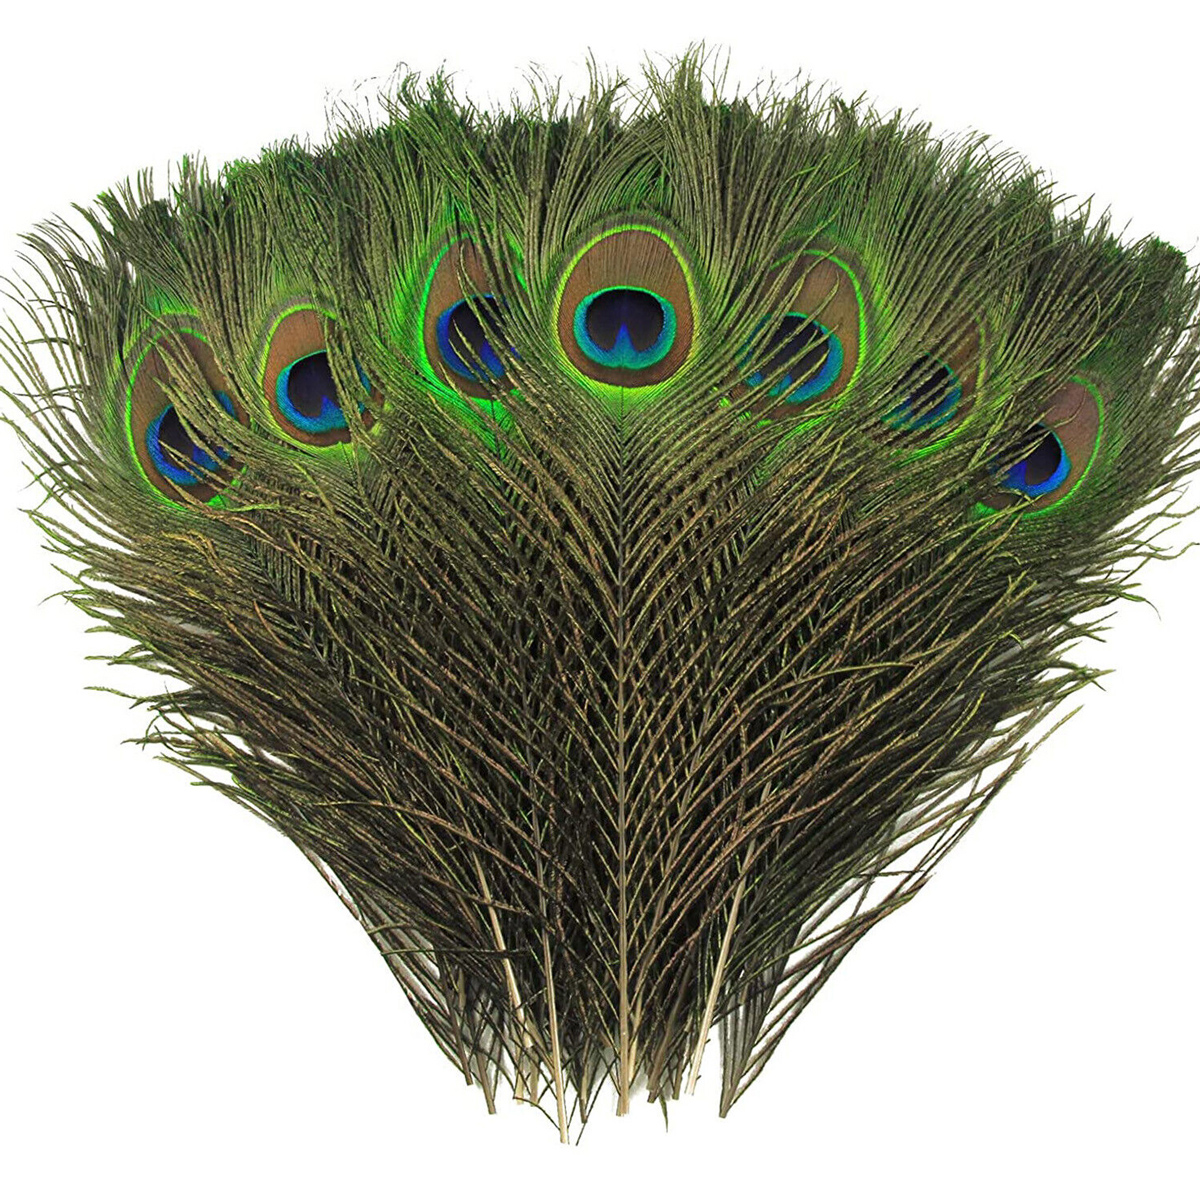 Lovely Natural Peacock Mor Pankh Real Peacock Feather Tails Home Decor Feng  Shui